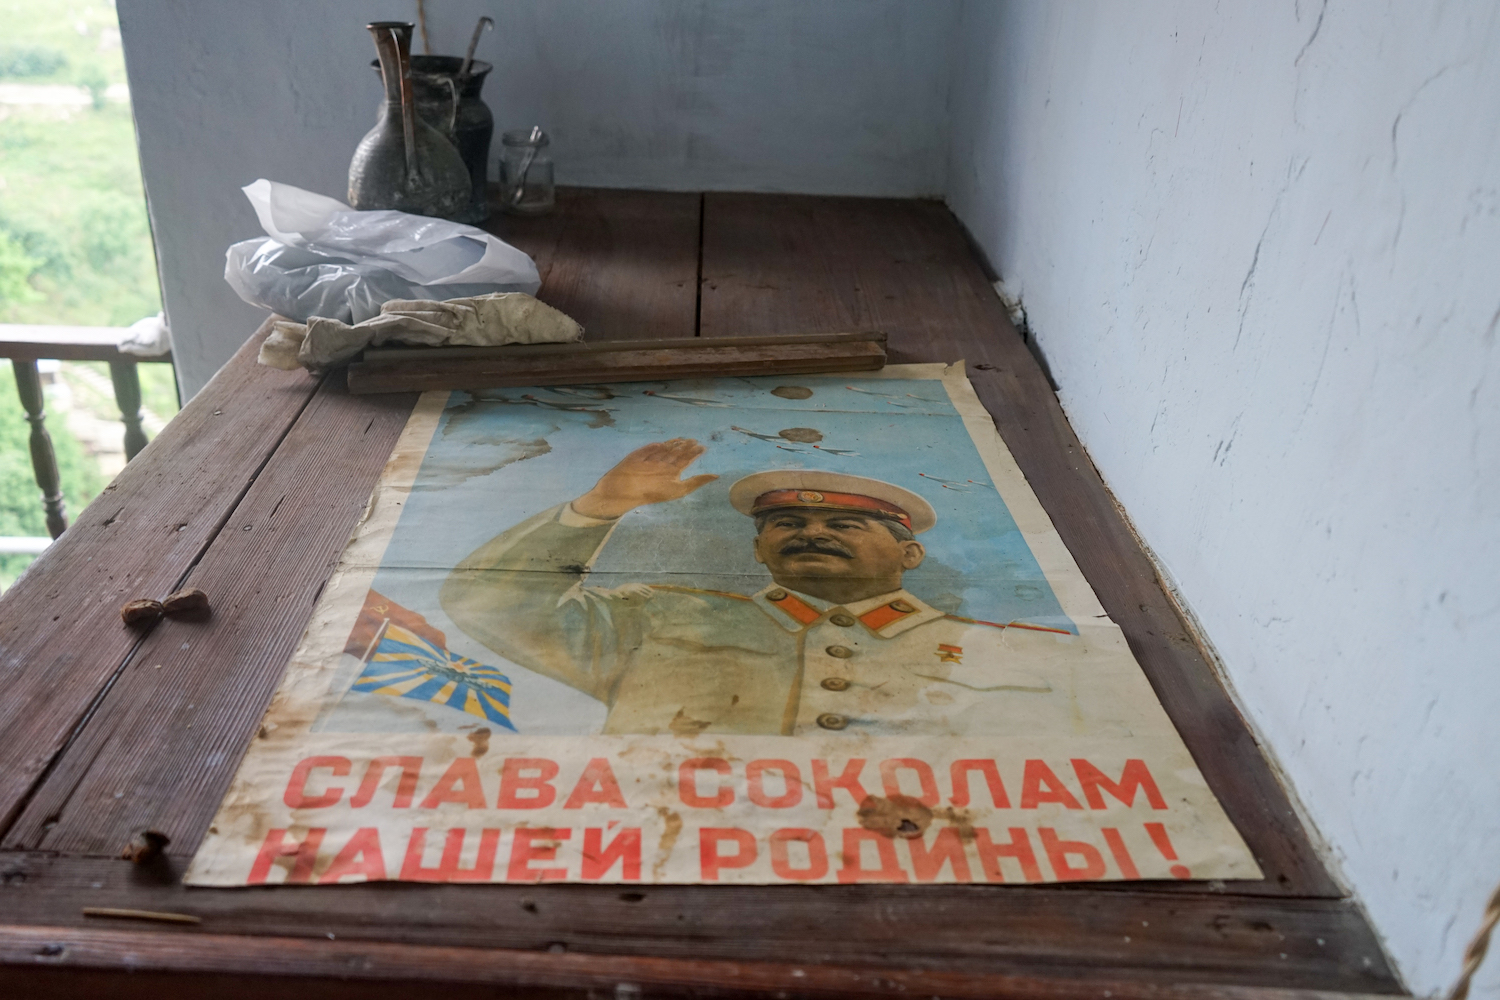 A Stalin-era poster in the village of Chokh.